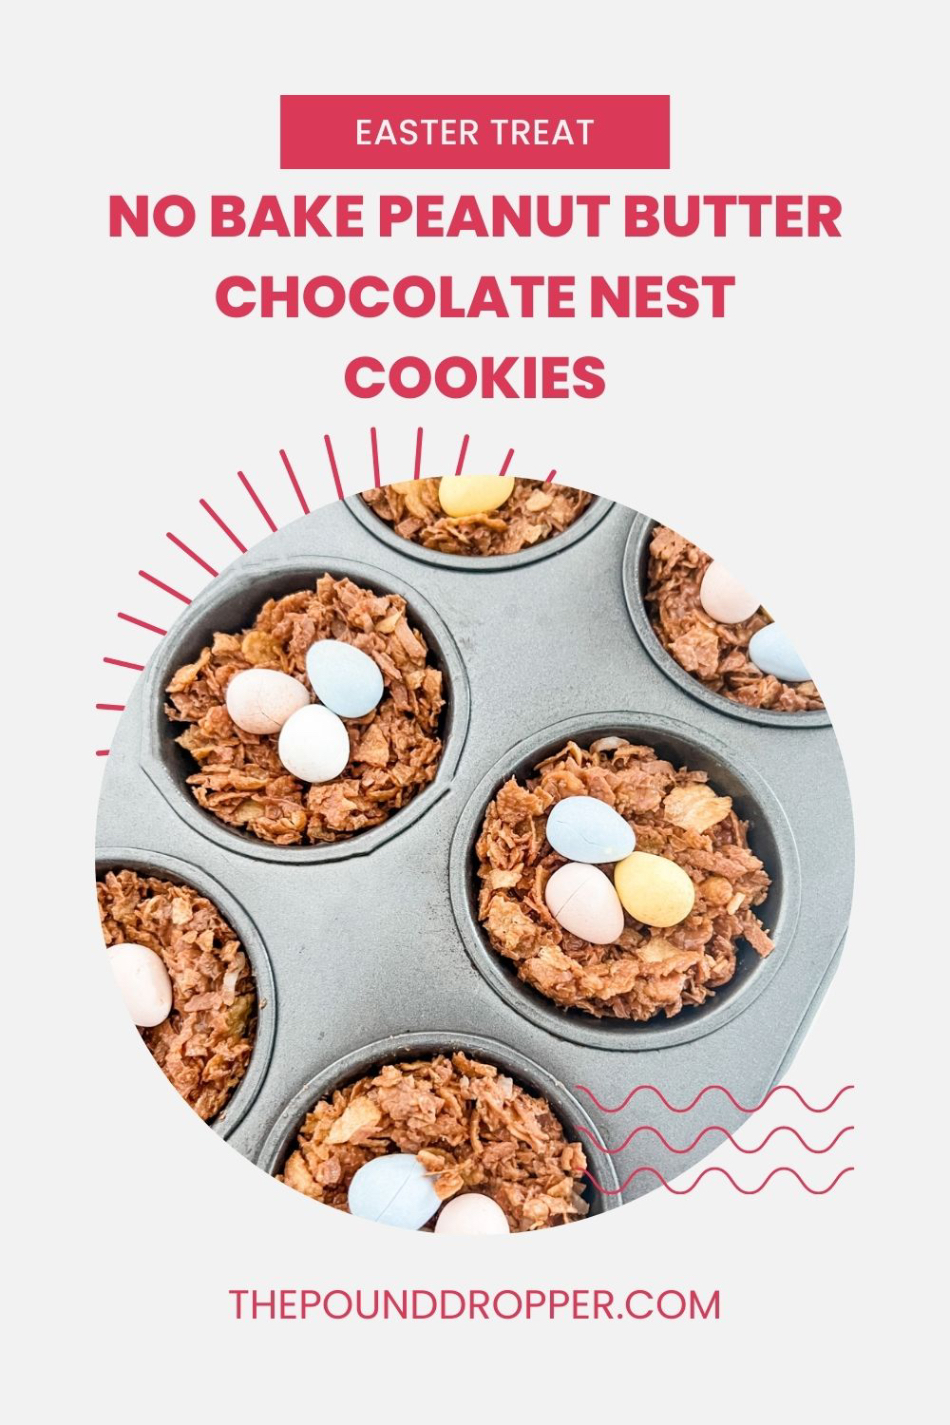 These No-Bake Peanut Butter Chocolate Egg Nest Cookies are made with sugar free chocolate chips, nut butter, cereal, and topped with candy eggs-they are simple to make, fun to eat, and make for a sweet Easter treat! via @pounddropper